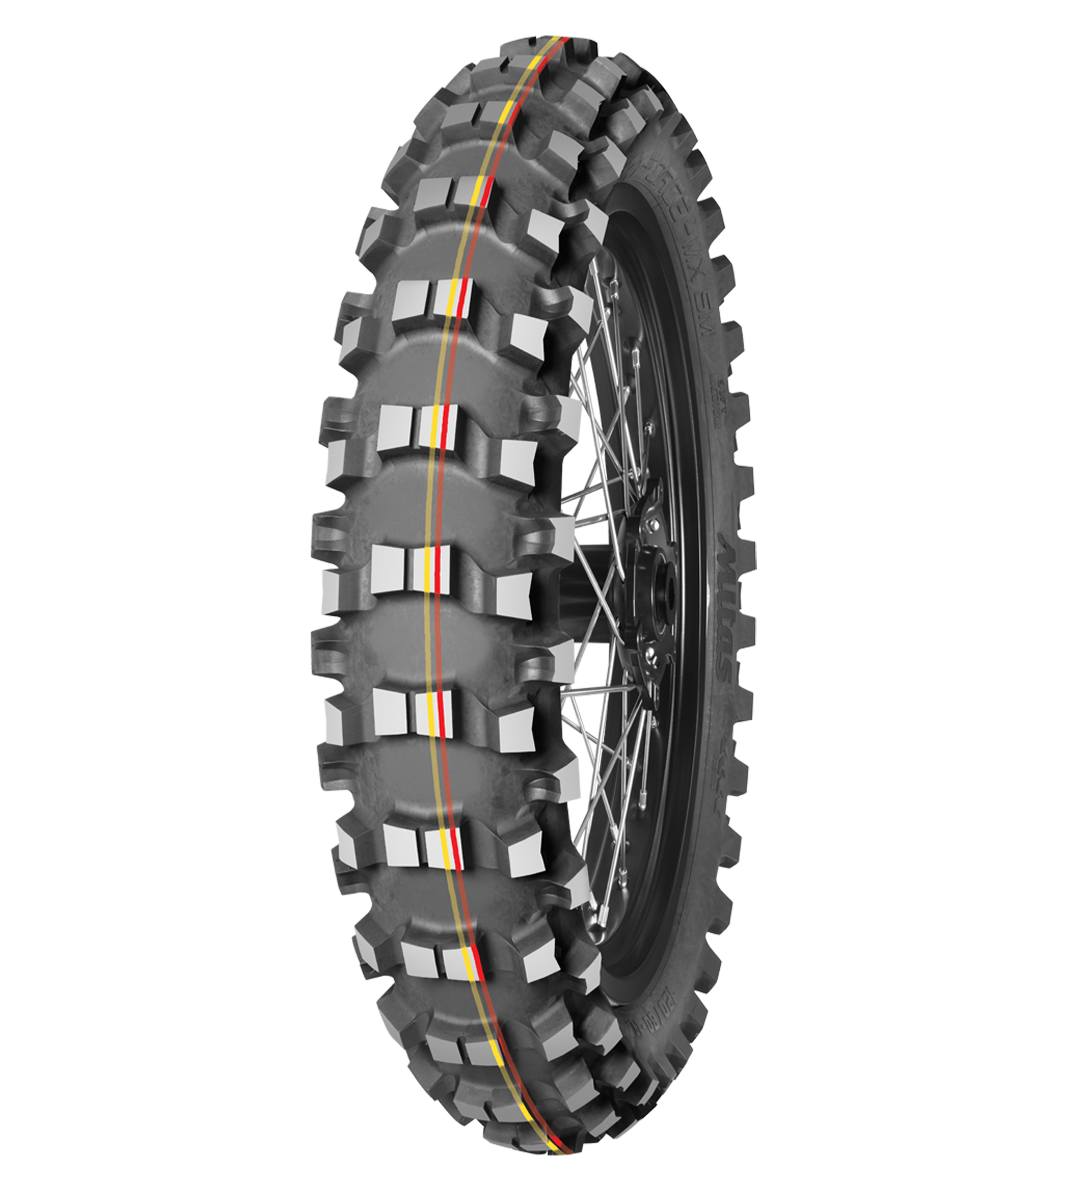 Mitas TERRA FORCE-MX SM 80/100-12 Motocross Competition Off-Road SOFT TO MEDIUM 50M Red & Yellow Tube Rear Tire, 226004, 80/100-12, Motocross, Motocross Competition, Off-Road, Rear, Terra Force, Terra Force-MX SM, Trail, Tires - Imported and distributed in North & South America by Lindeco Genuine Powersports - Premier Powersports Equipment and Accessories for Motorcycle Enthusiasts, Professional Riders and Dealers.